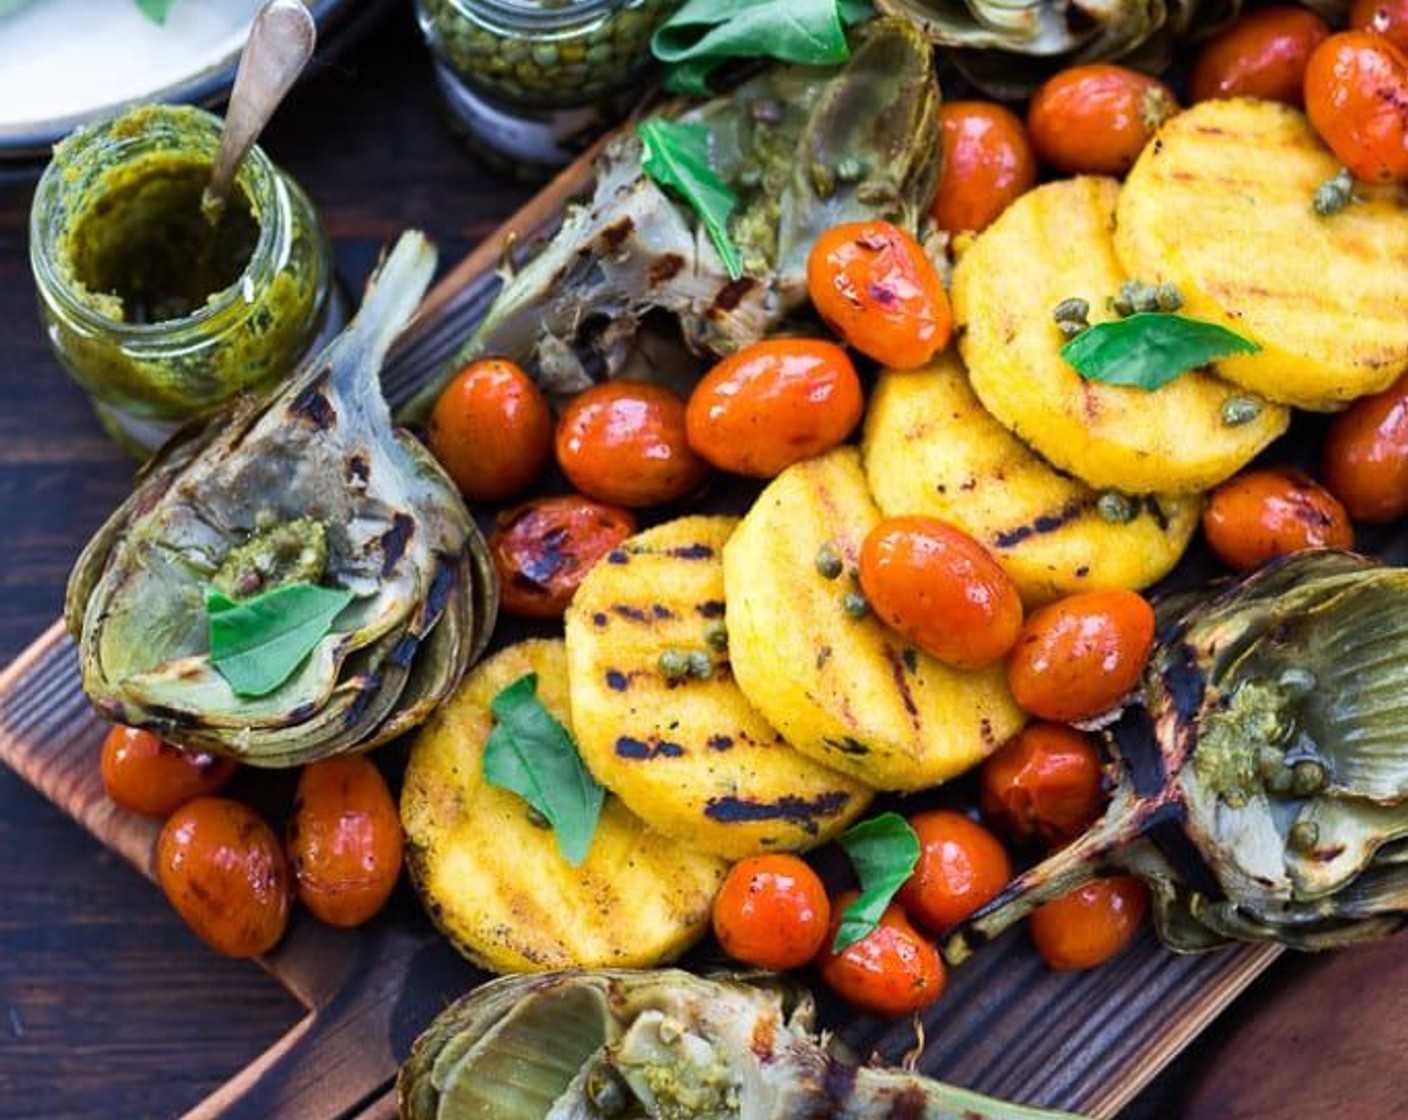 Grilled Artichokes & Polenta with Blistered Tomatoes